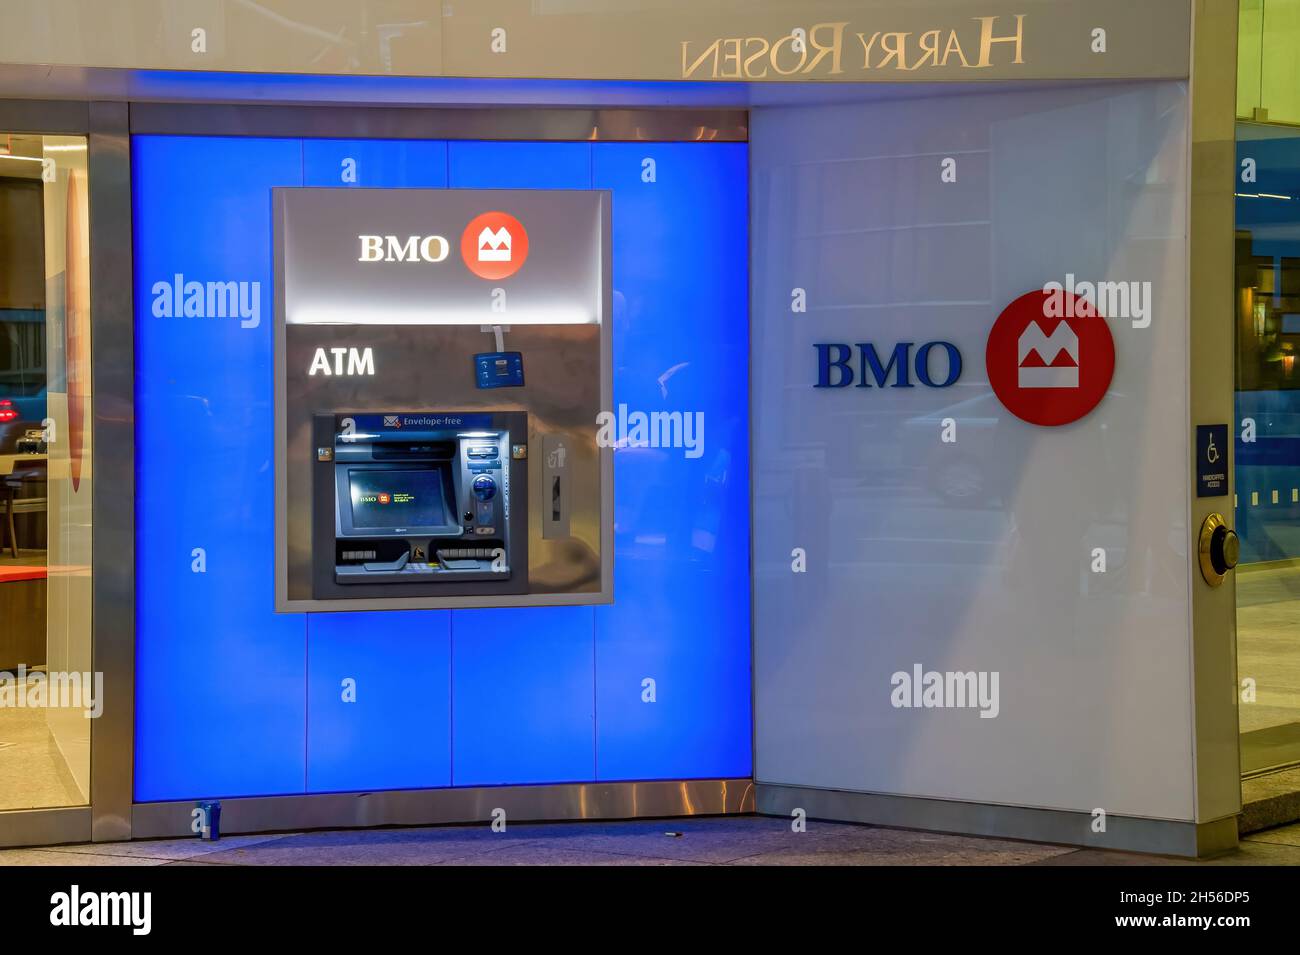 Automatic teller machine branded Bank of Montreal or BMO in Toronto, Canada. Nov. 6, 2021 Stock Photo